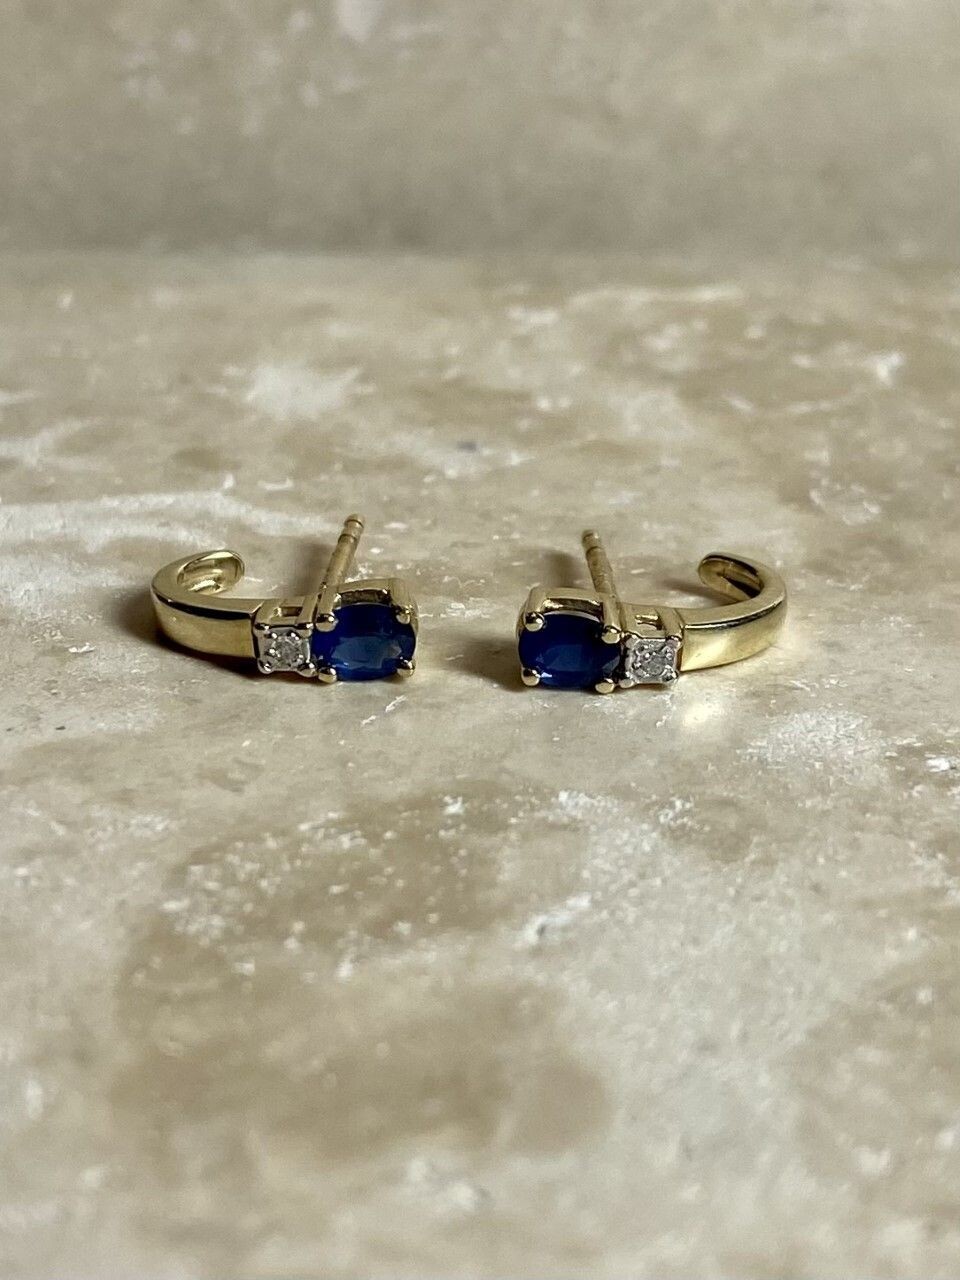 Golden earrings with blue sapphire